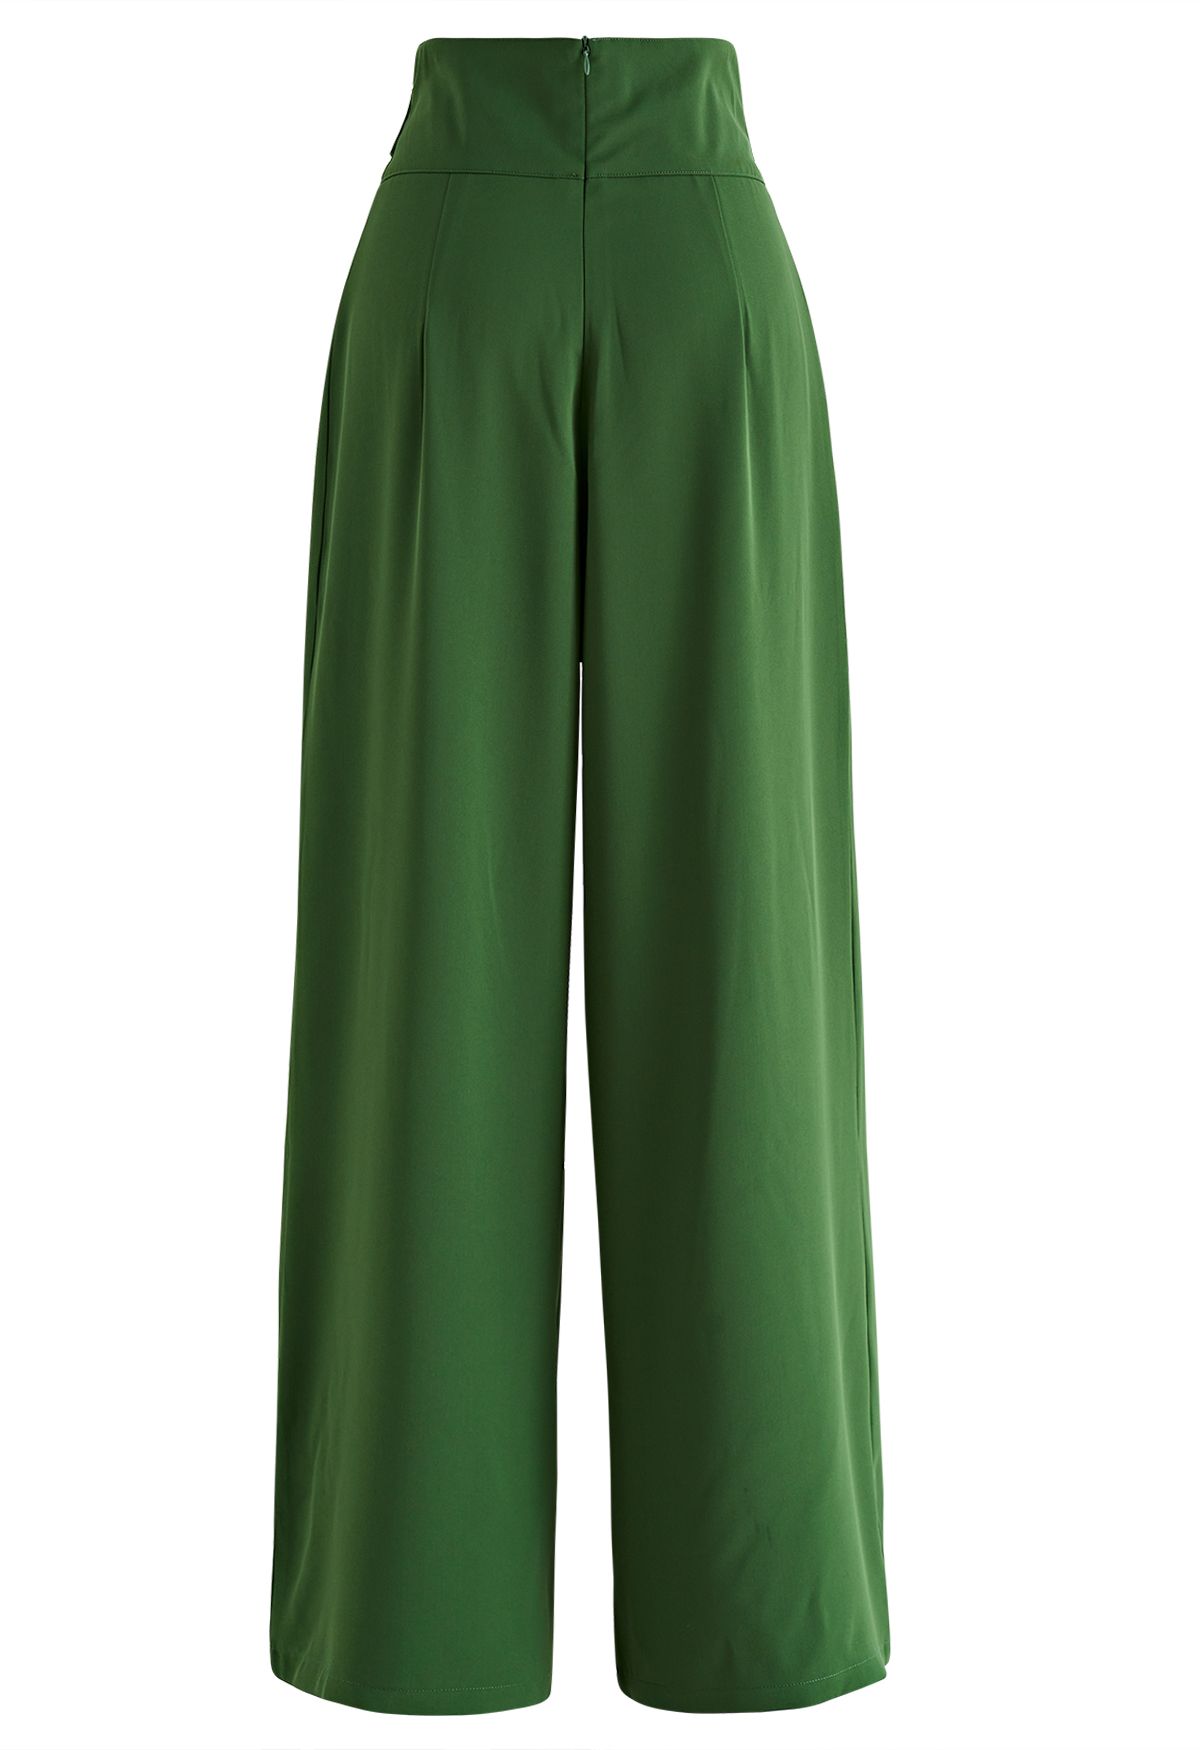 Bowknot High Waist Wide-Leg Pants in Dark Green - Retro, Indie and ...